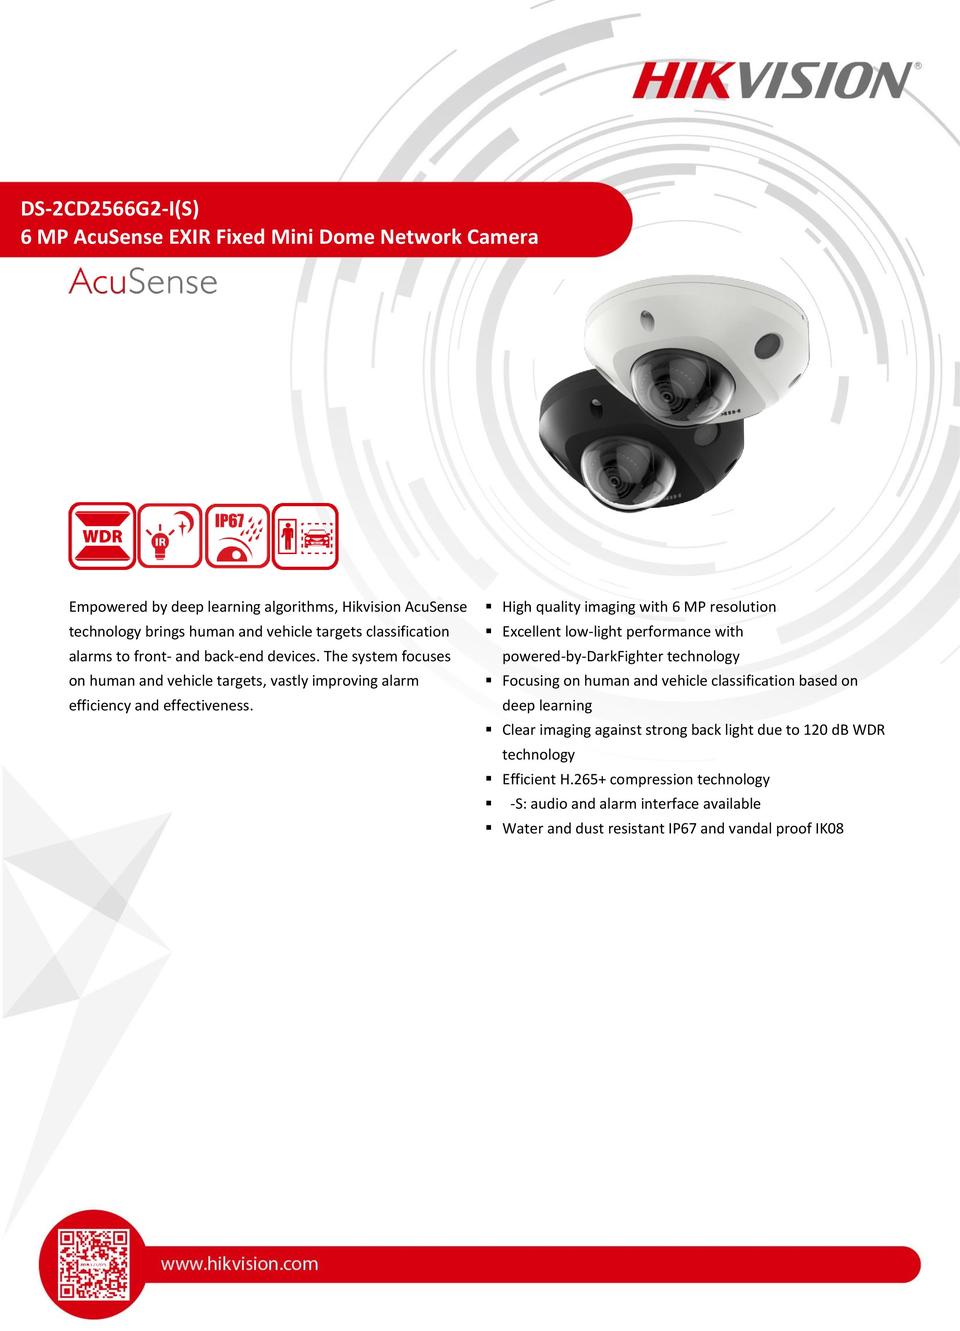 Hikvision DS-2CD2566G2-IS 6MP IP Acusense Outdoor Mini Dome / Mic with 2.8 Fixed Lens 0